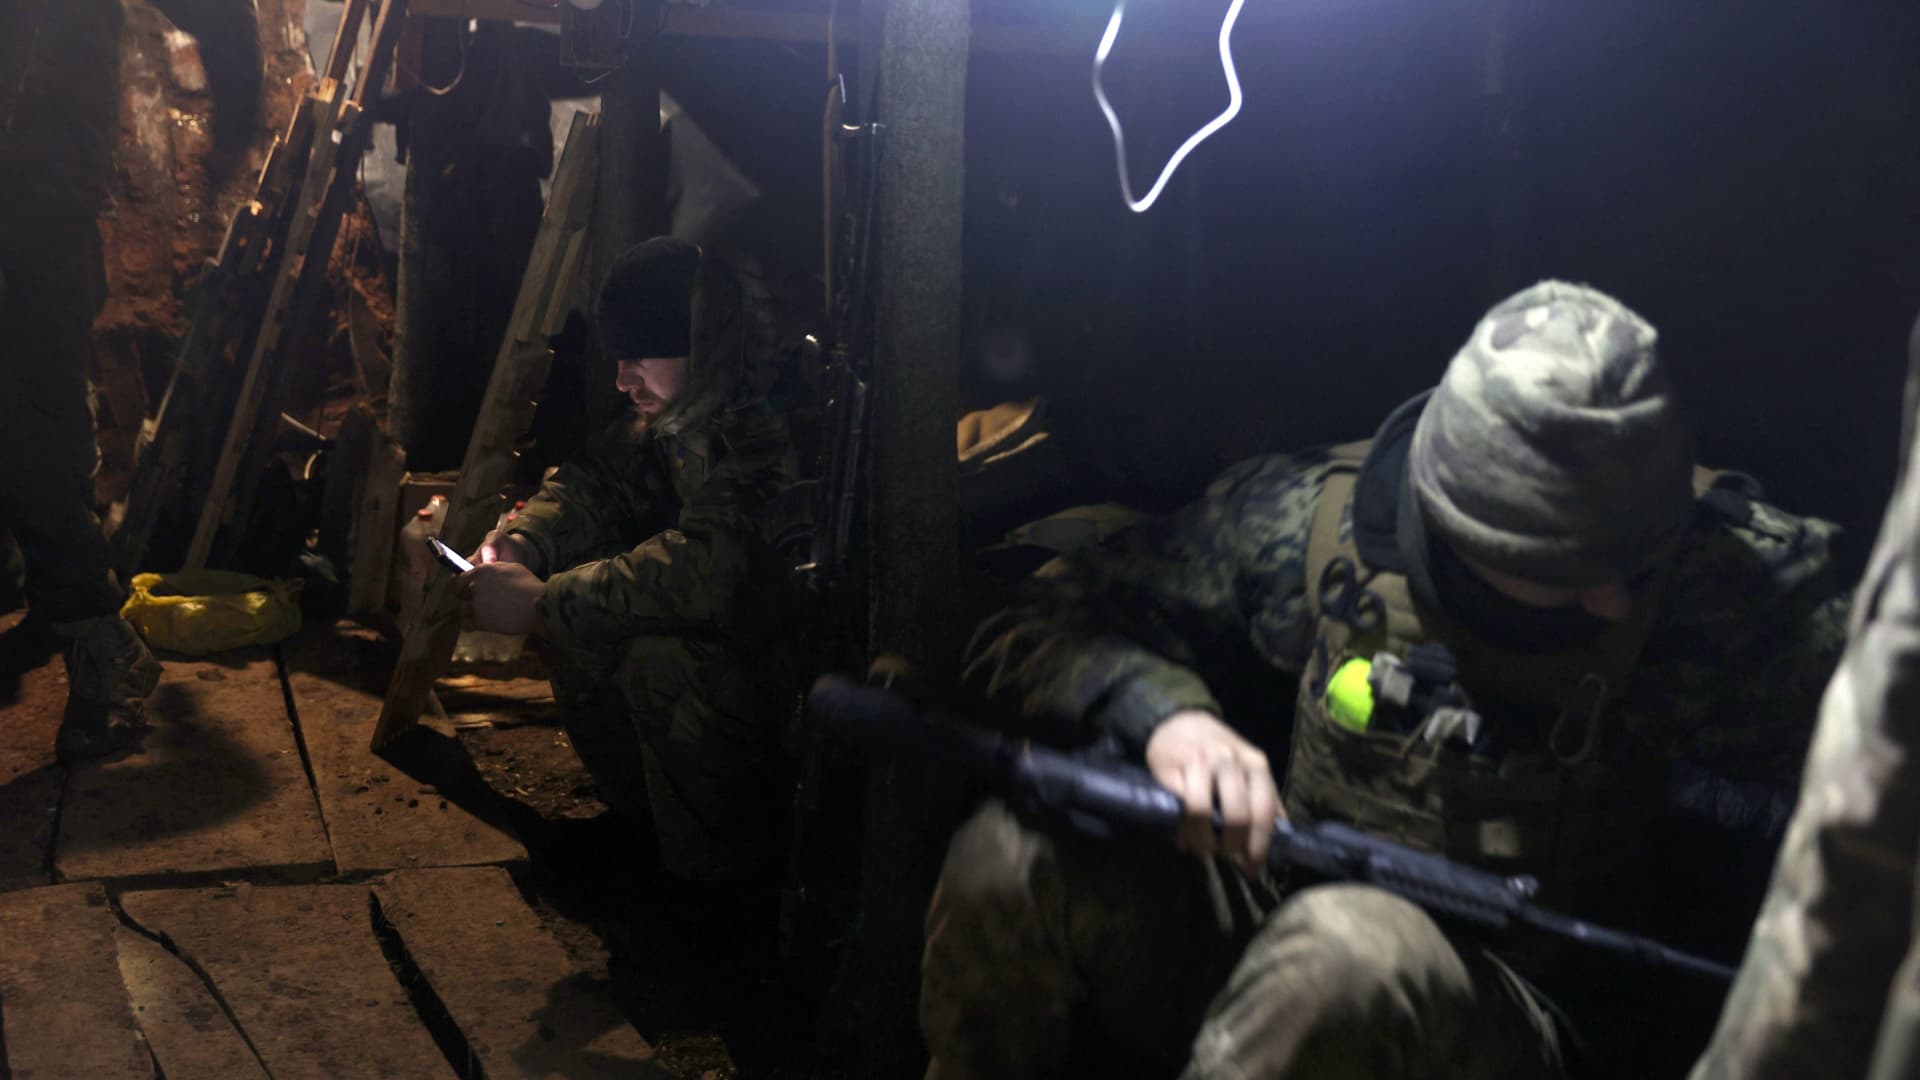 Ukrainian soldiers rest in a dugout on the front line near Bakhmut in the Donetsk region on Feb. 21, 2023.